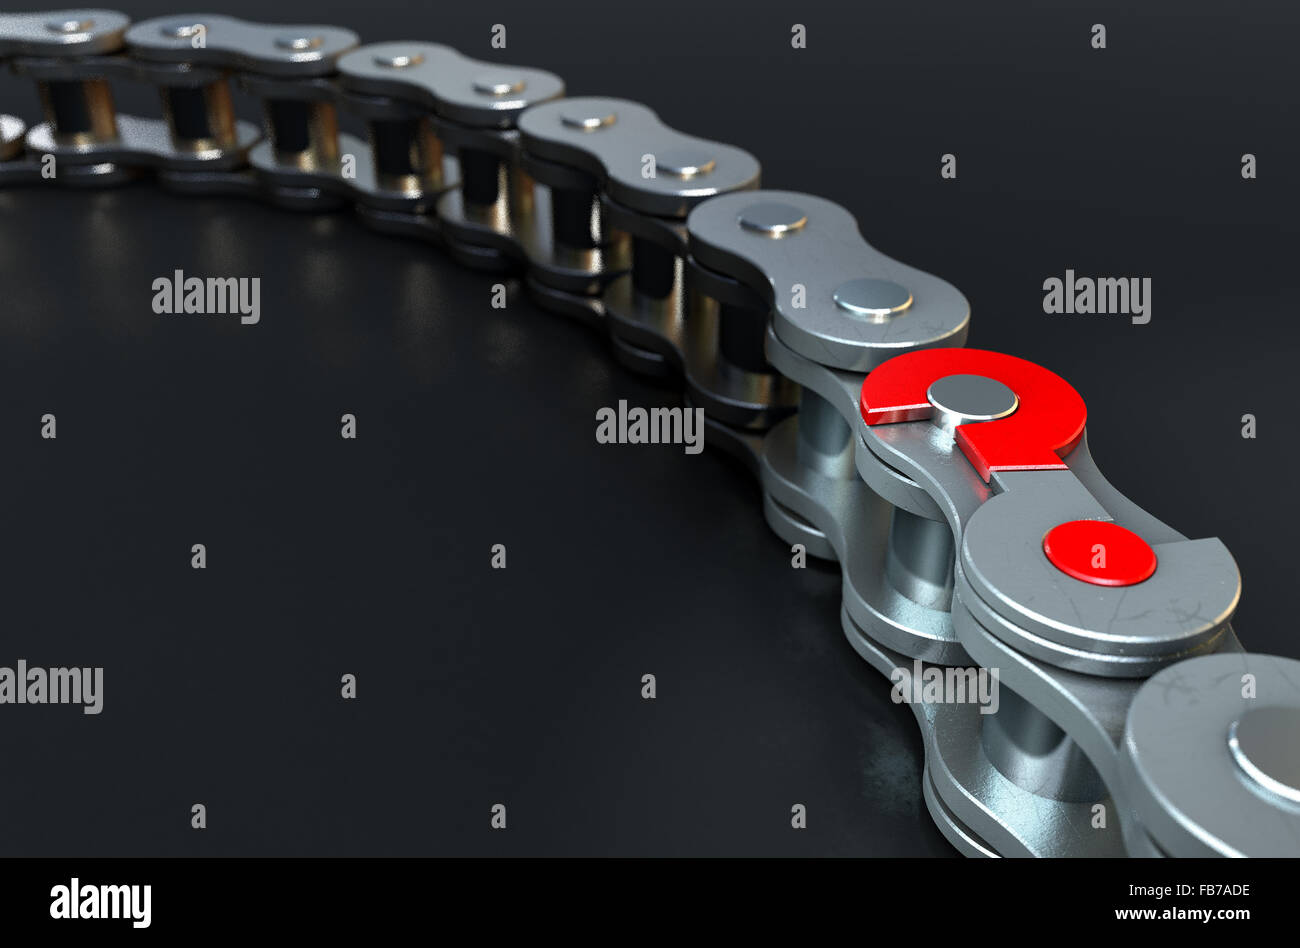 A regular bicycle chain with a question mark as its master link on a dark isolated background Stock Photo